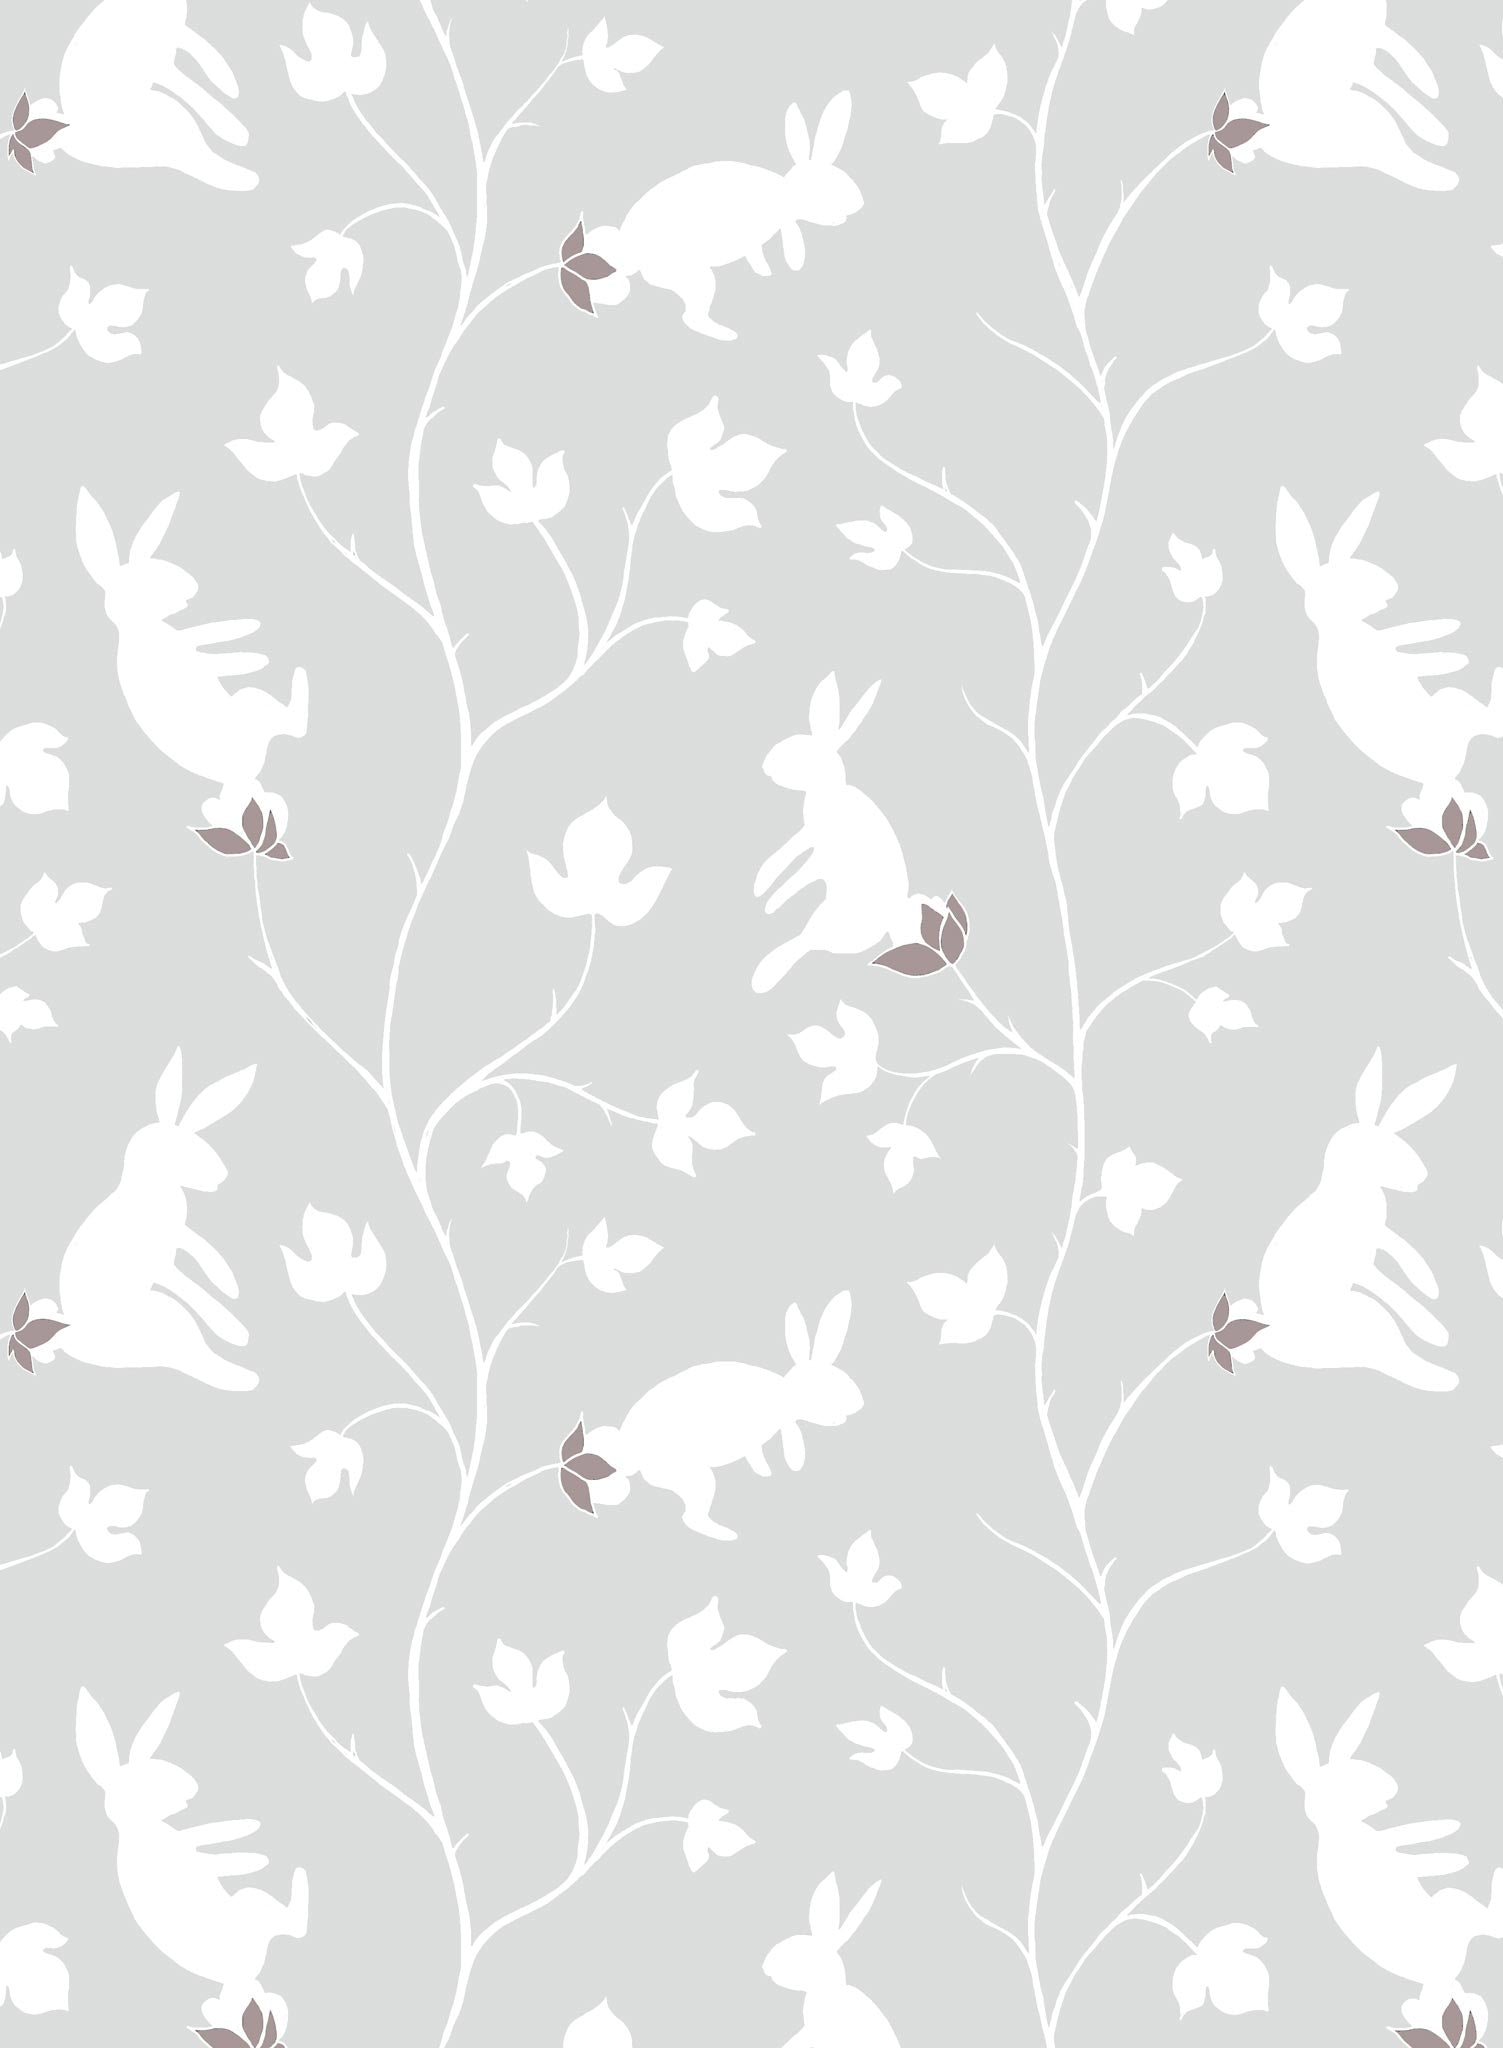 Bunny Tree is a minimalist wallpaper by Opposite Wall of rabbits growing in trees.